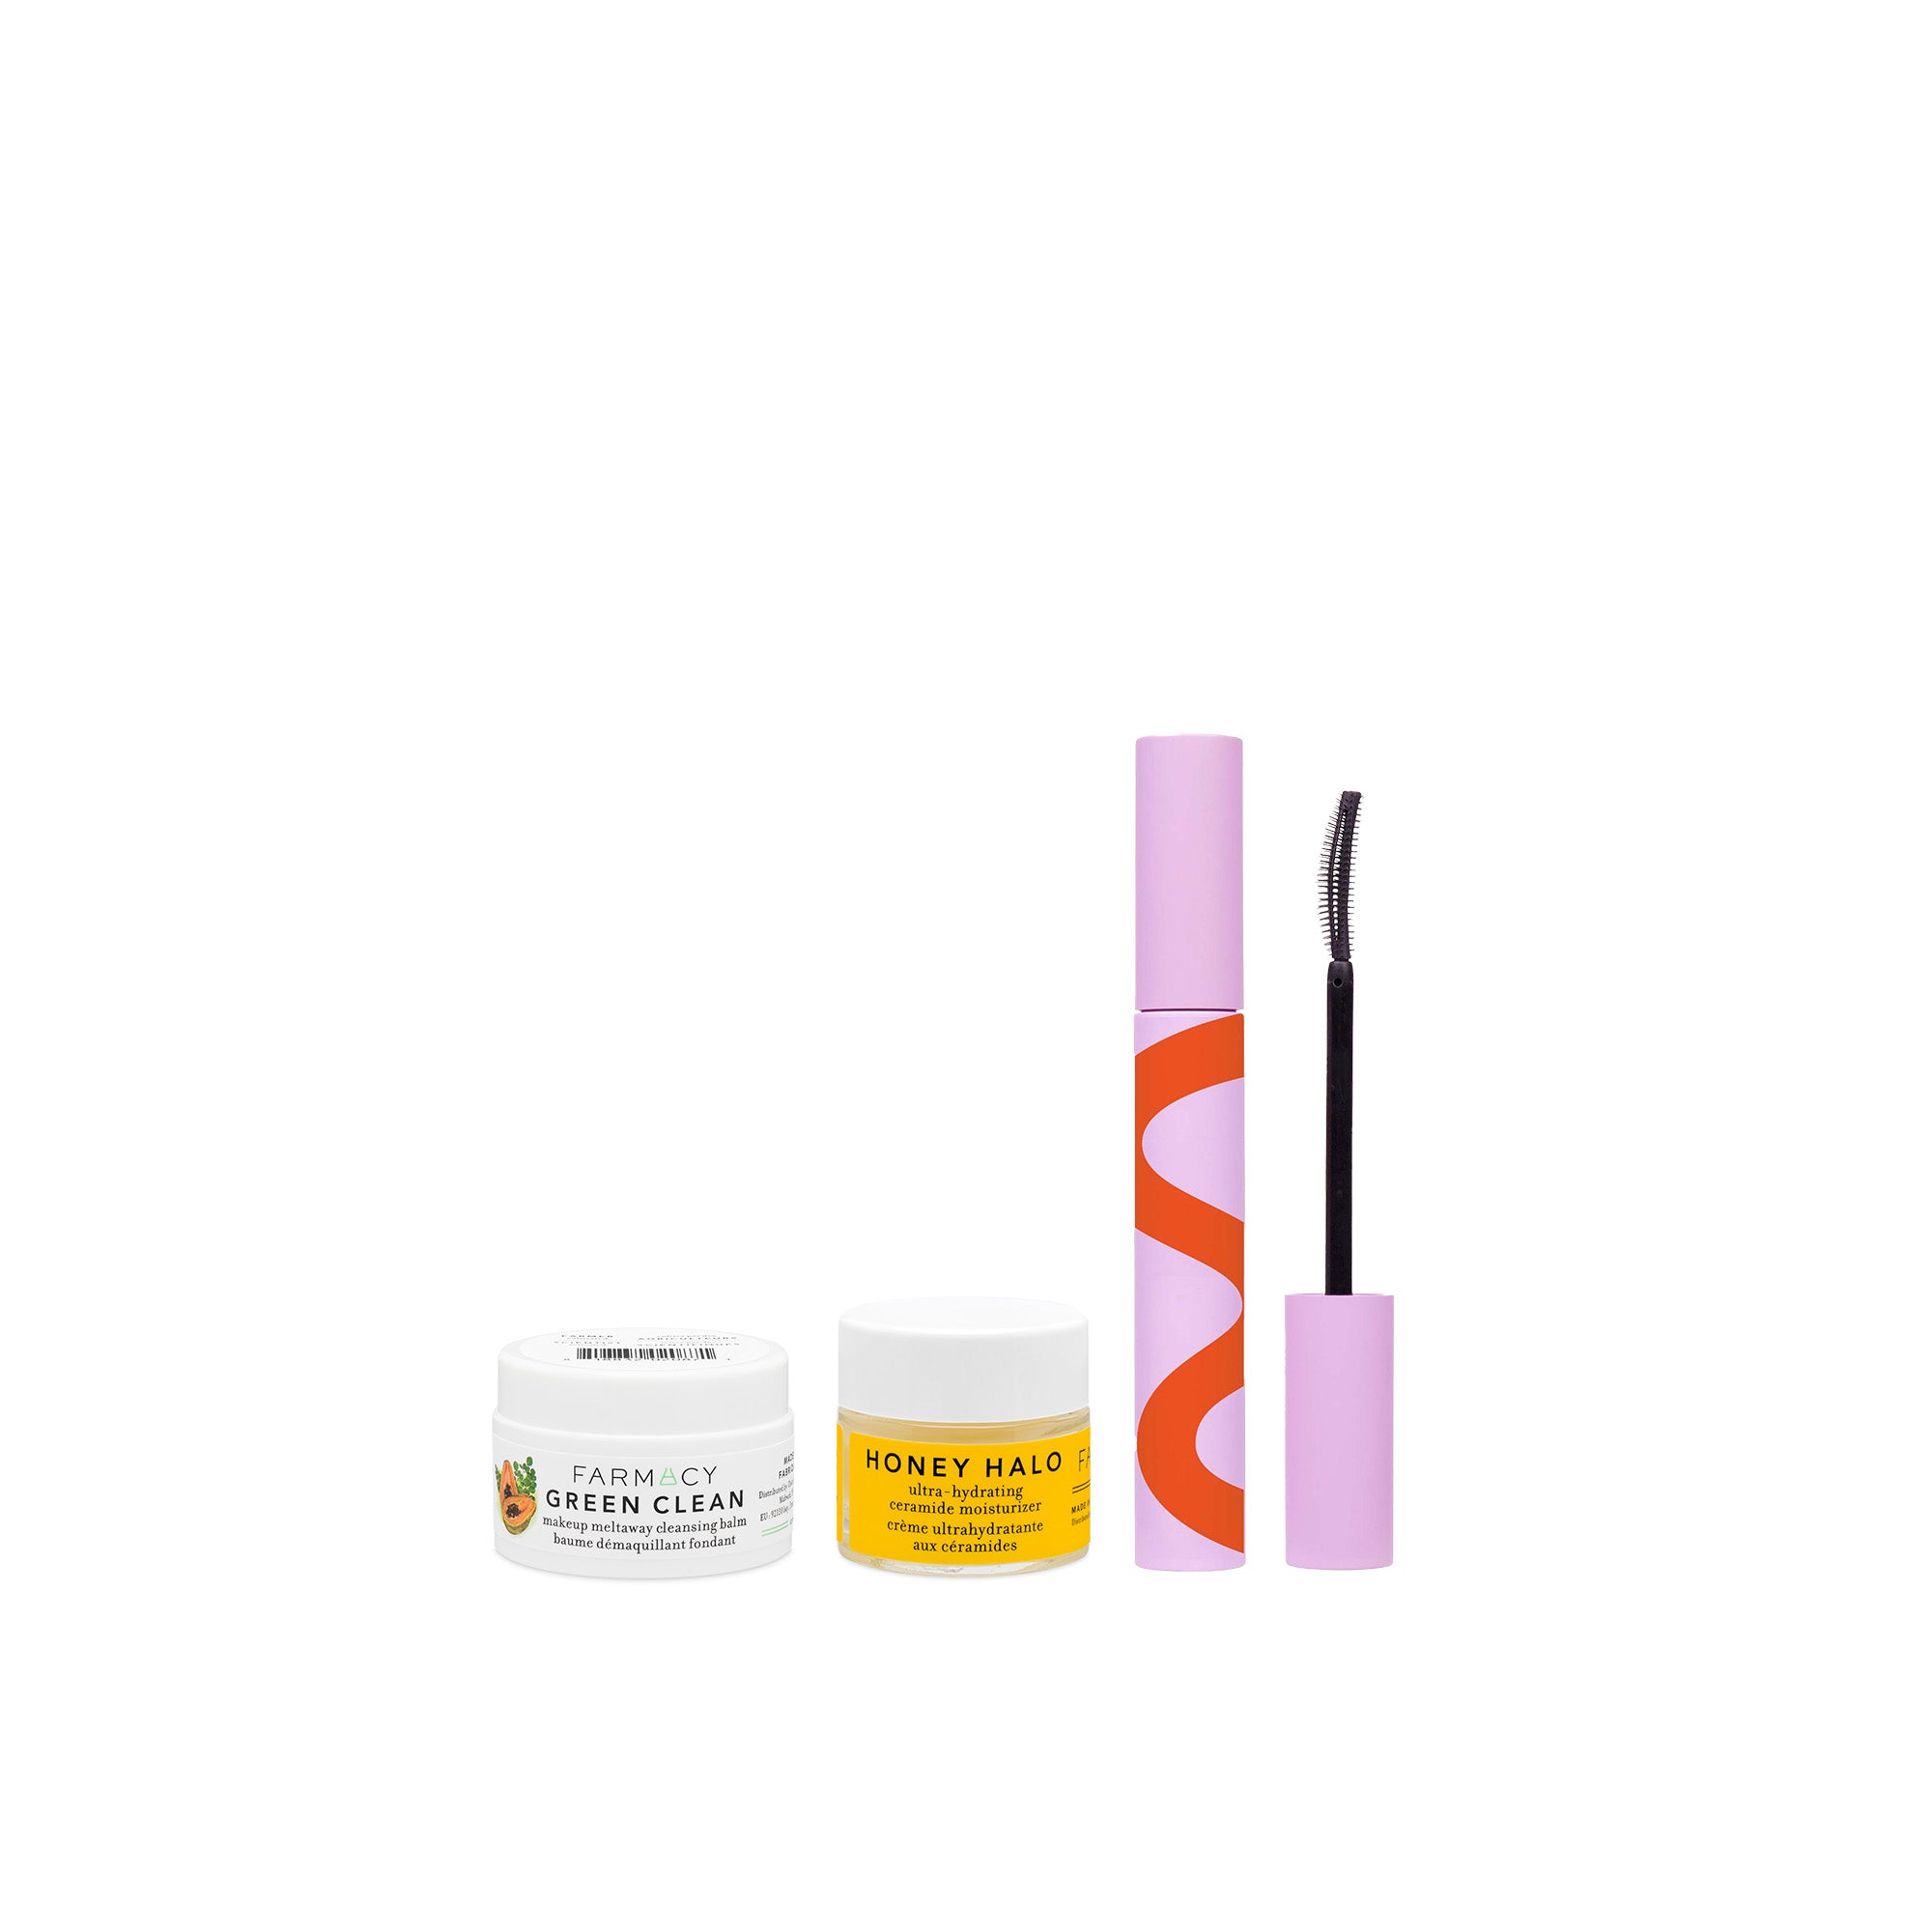 Farmacy x Tower 28 Gift ($41 Value)